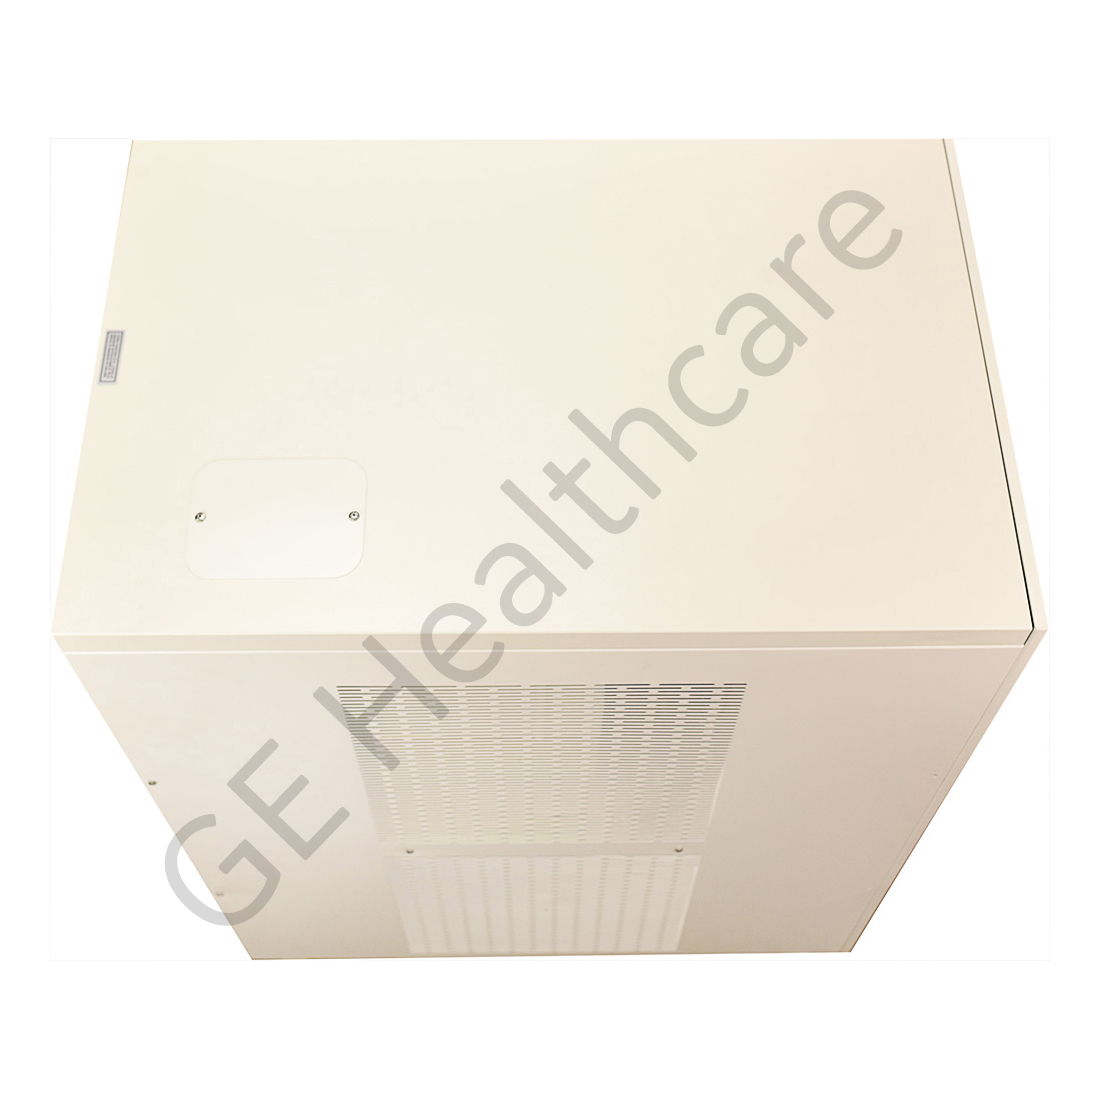 COOLIX 4000 CHILLER FOR PERFORMIX 160 VASCULAR X-Ray TUBE UNIT WITH RS232 - no capacitors